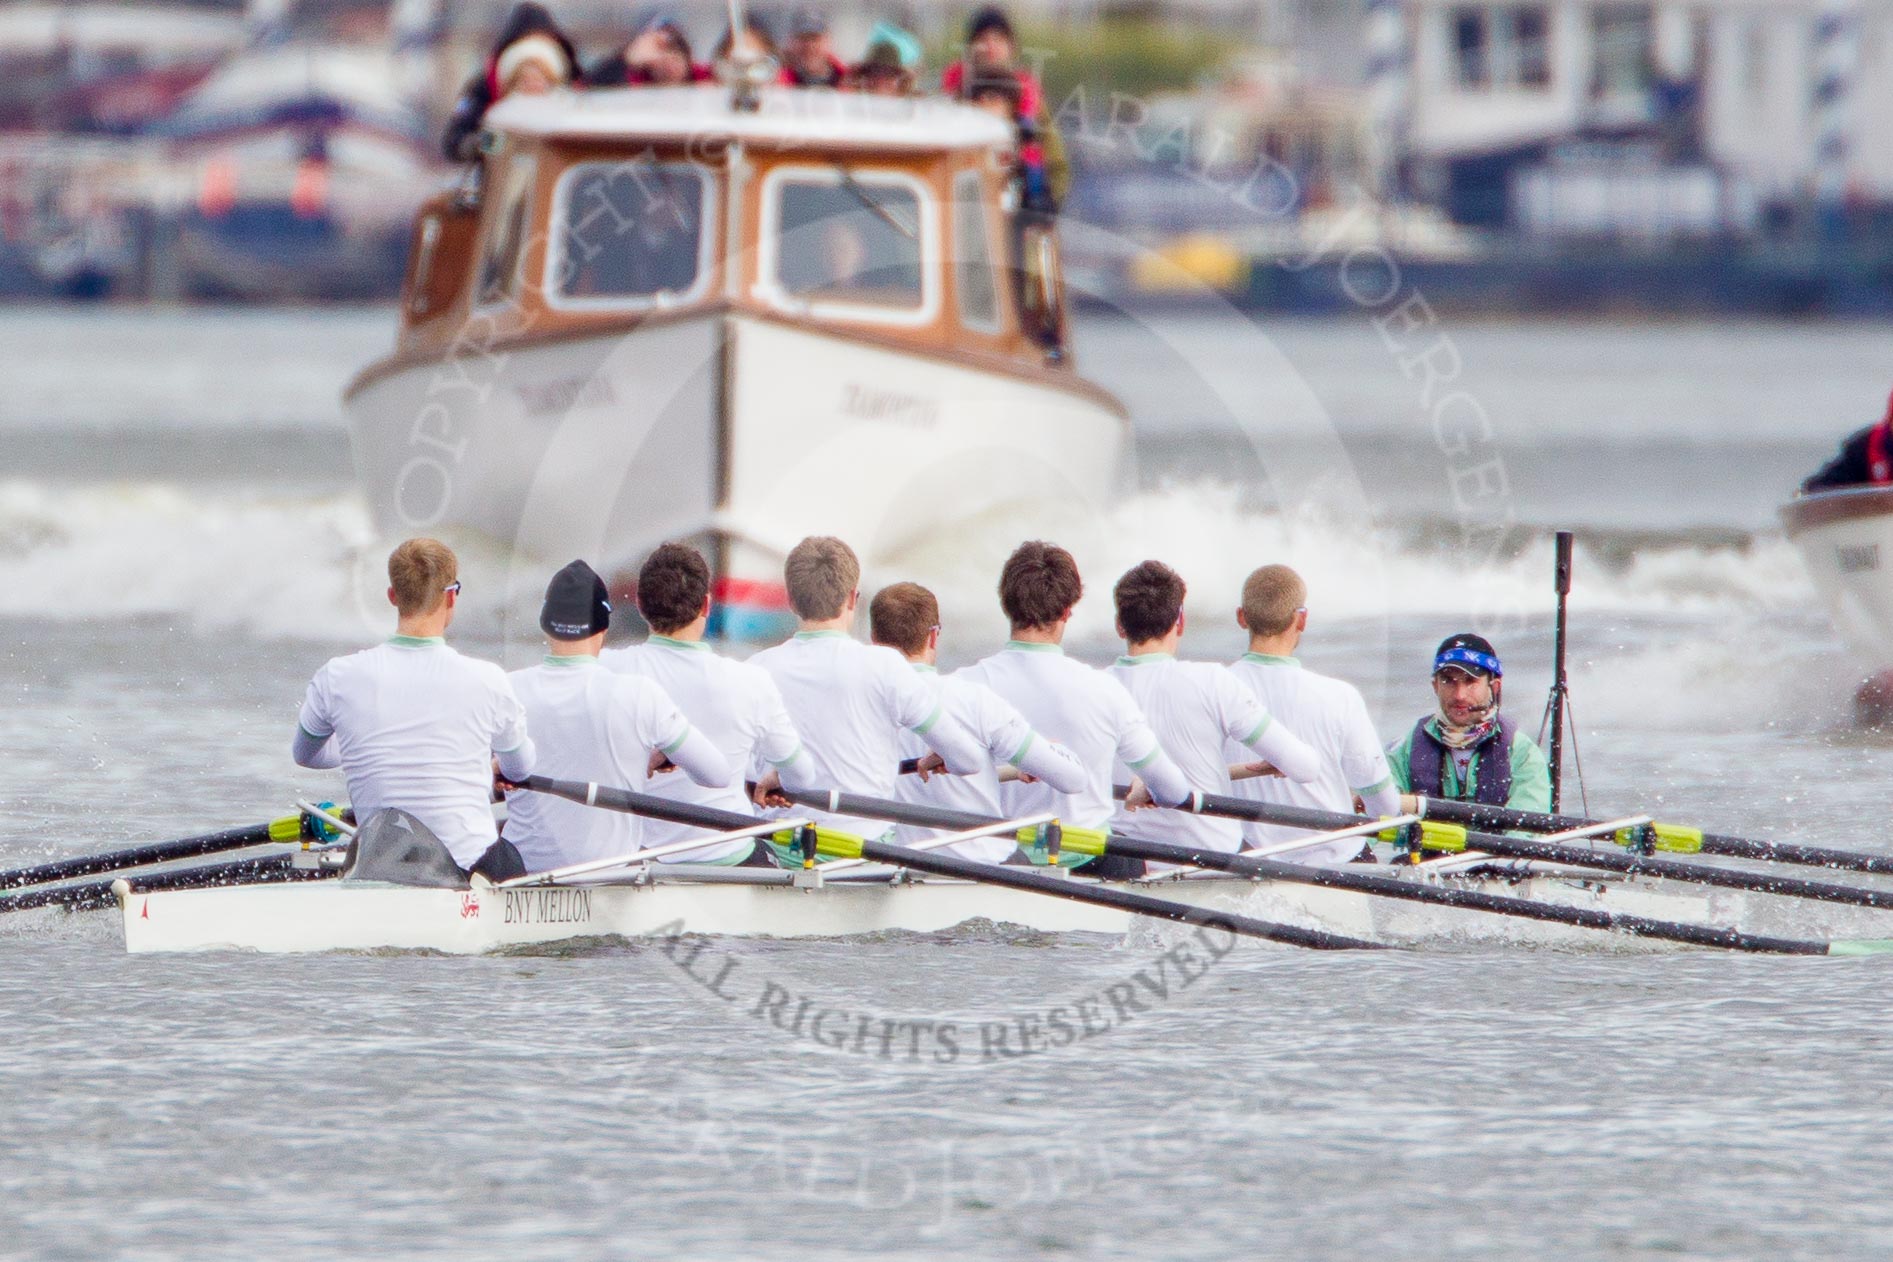 The Boat Race 2013.
Putney,
London SW15,

United Kingdom,
on 31 March 2013 at 16:31, image #263